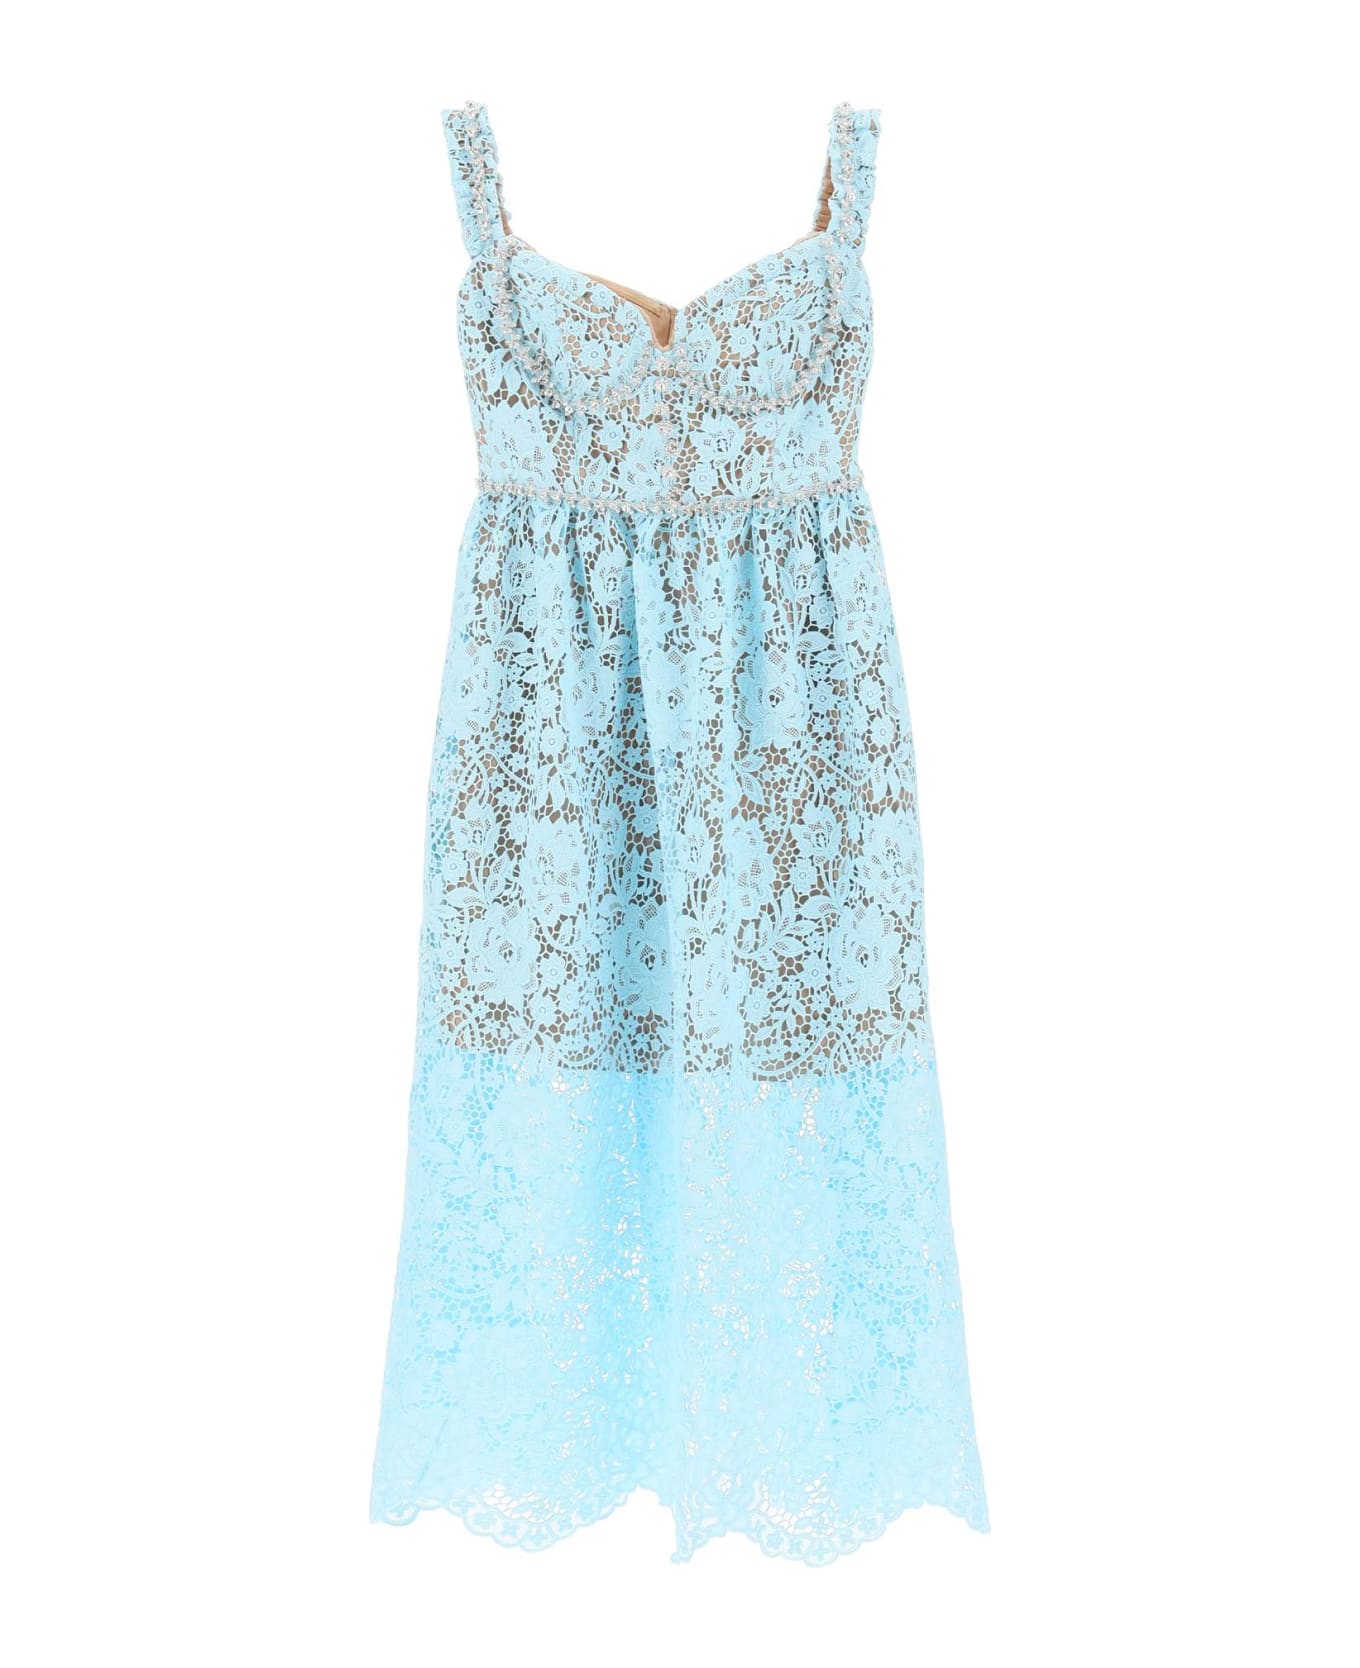 self-portrait Midi Dress In Floral Lace With Crystals - BLUE (Light blue)